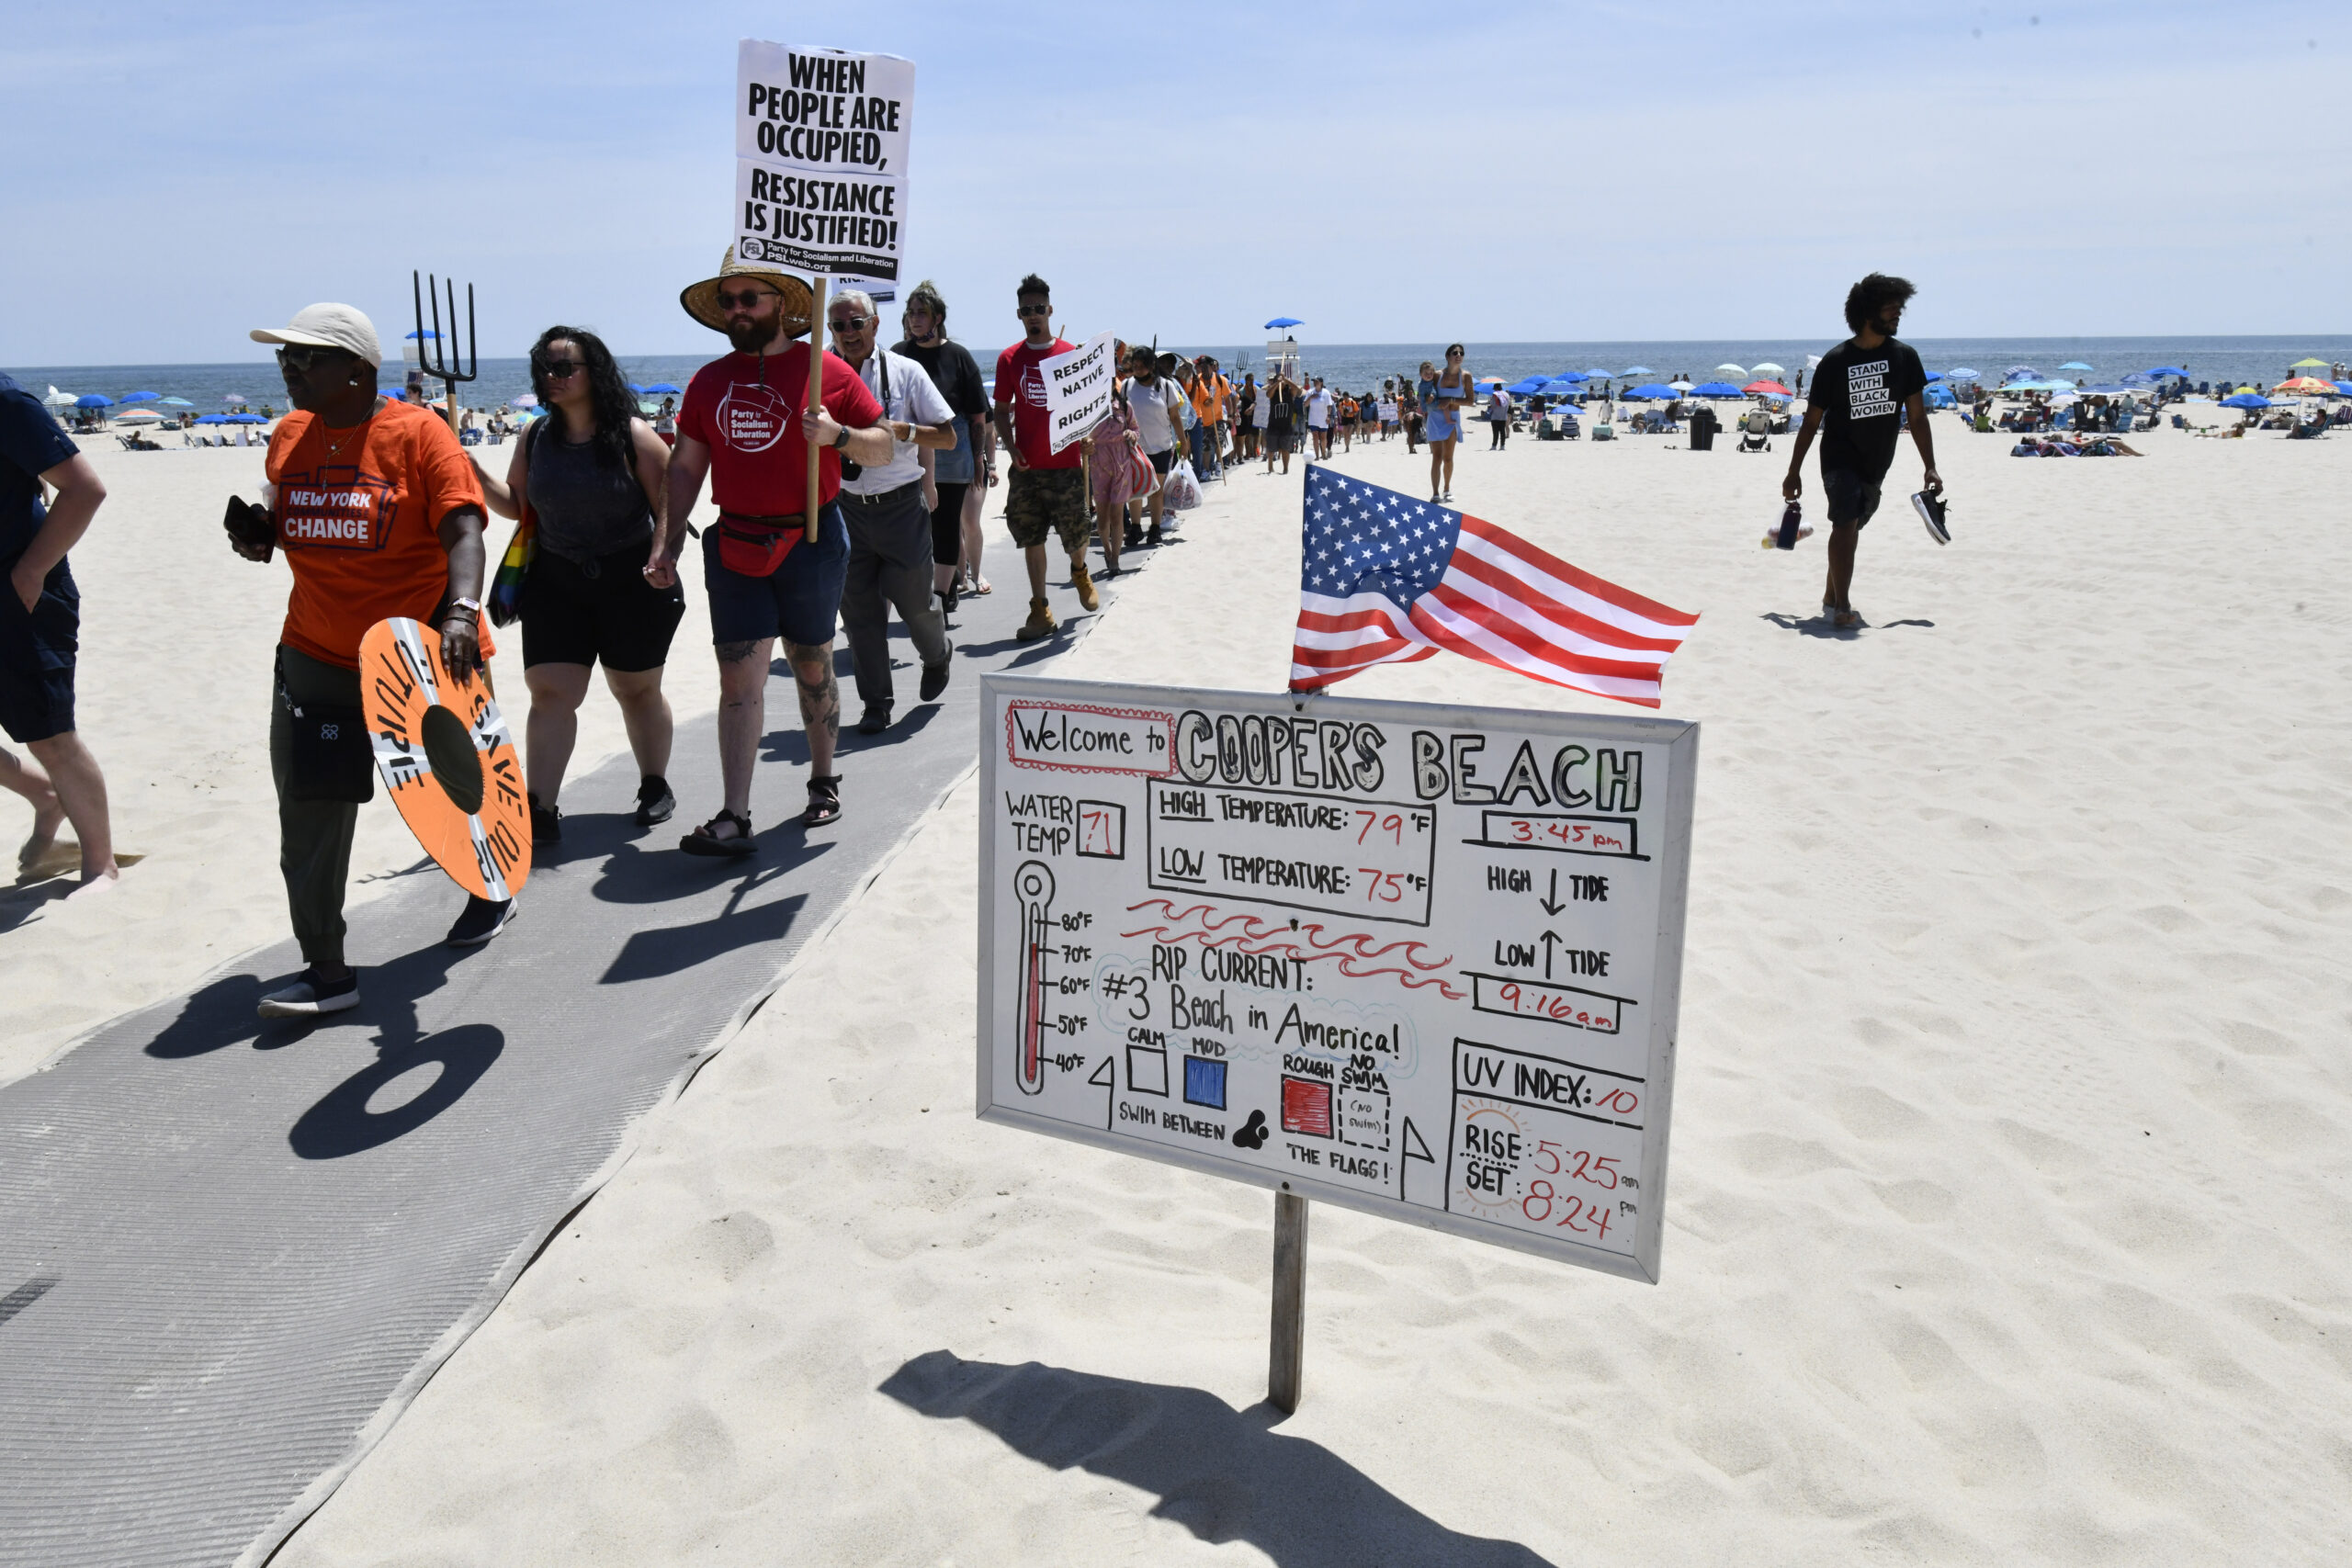 Members of the Shinnecock Nation hosted a #beachback protest at Coopers Beach on Saturday afternoon to demand that the Southampton Village Board give free beach access to tribal members.     DANA SHAW